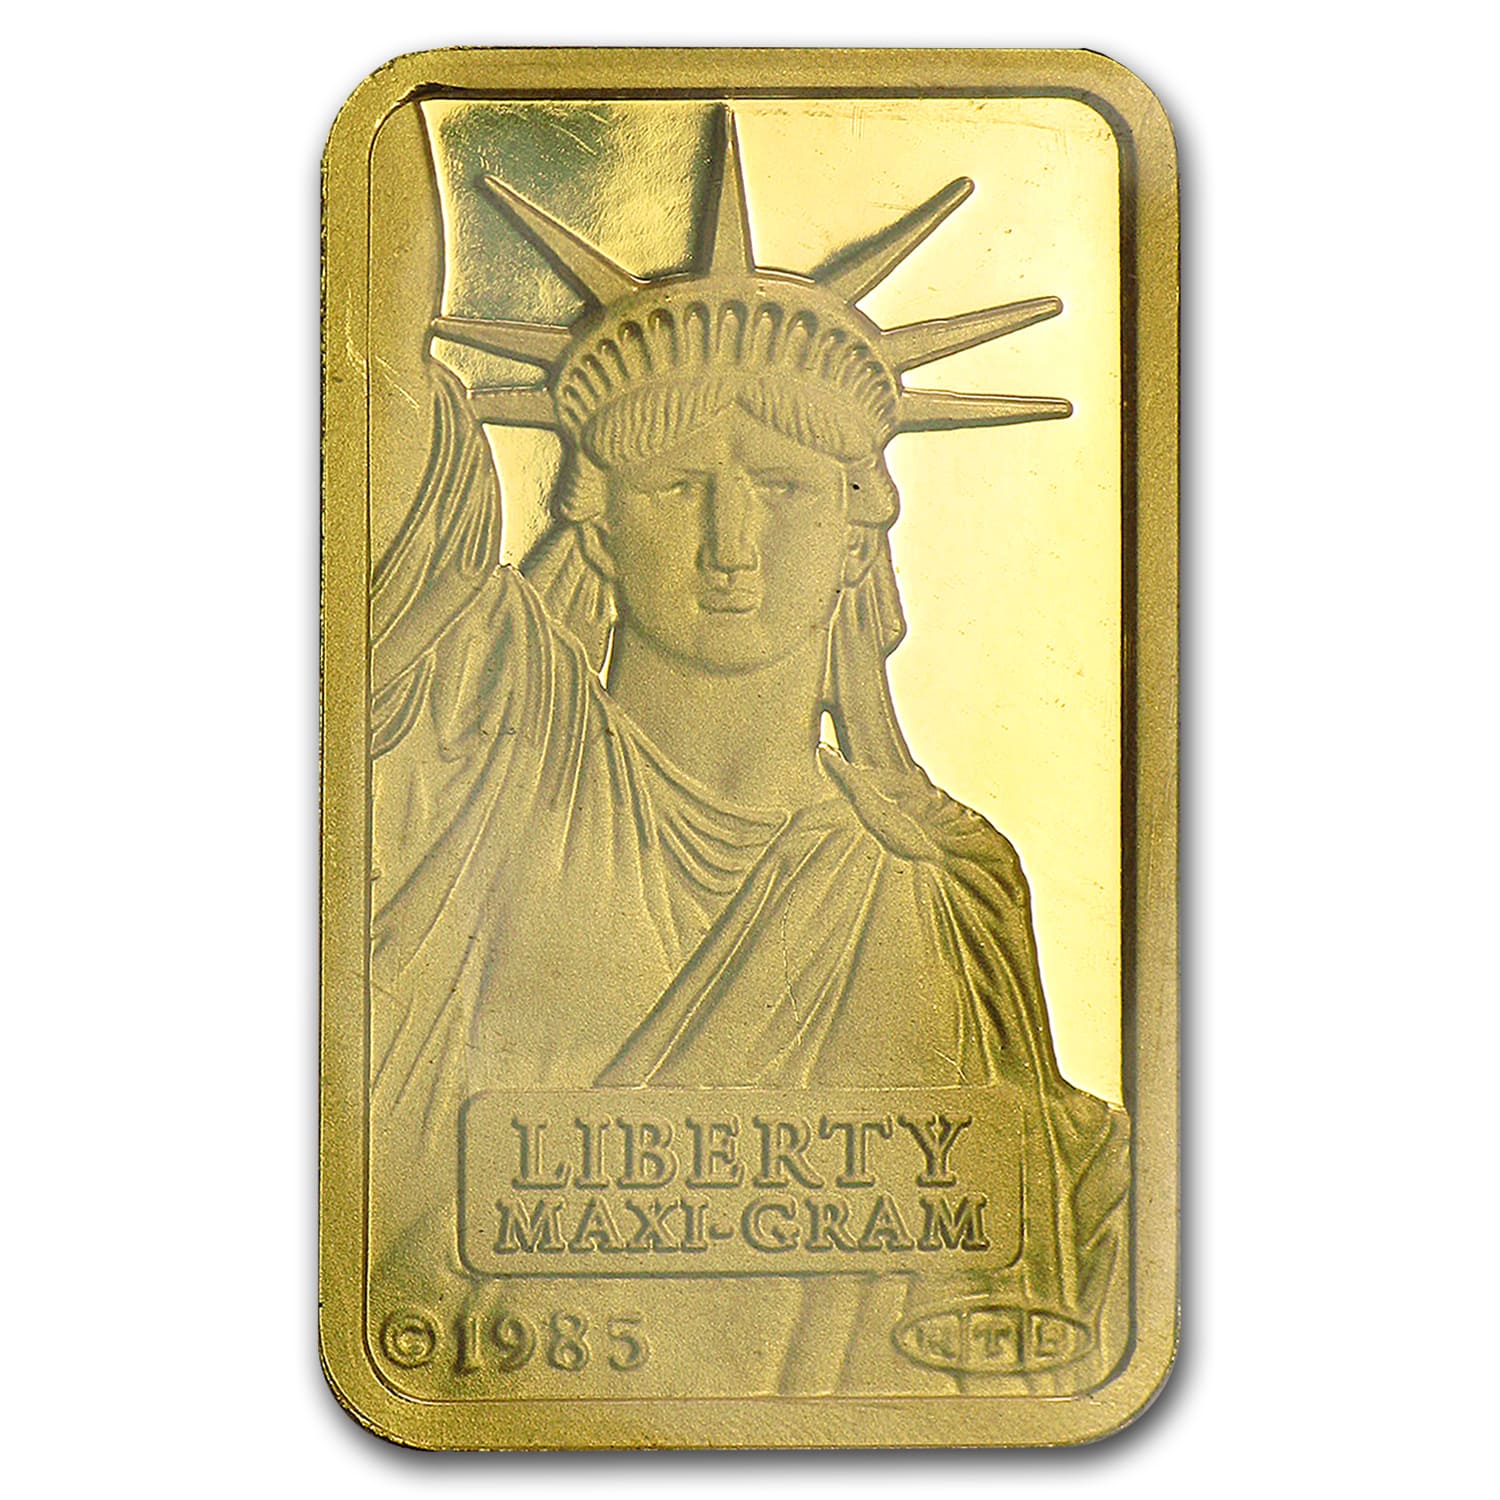 10g credit suisse gold bar with statue of liberty